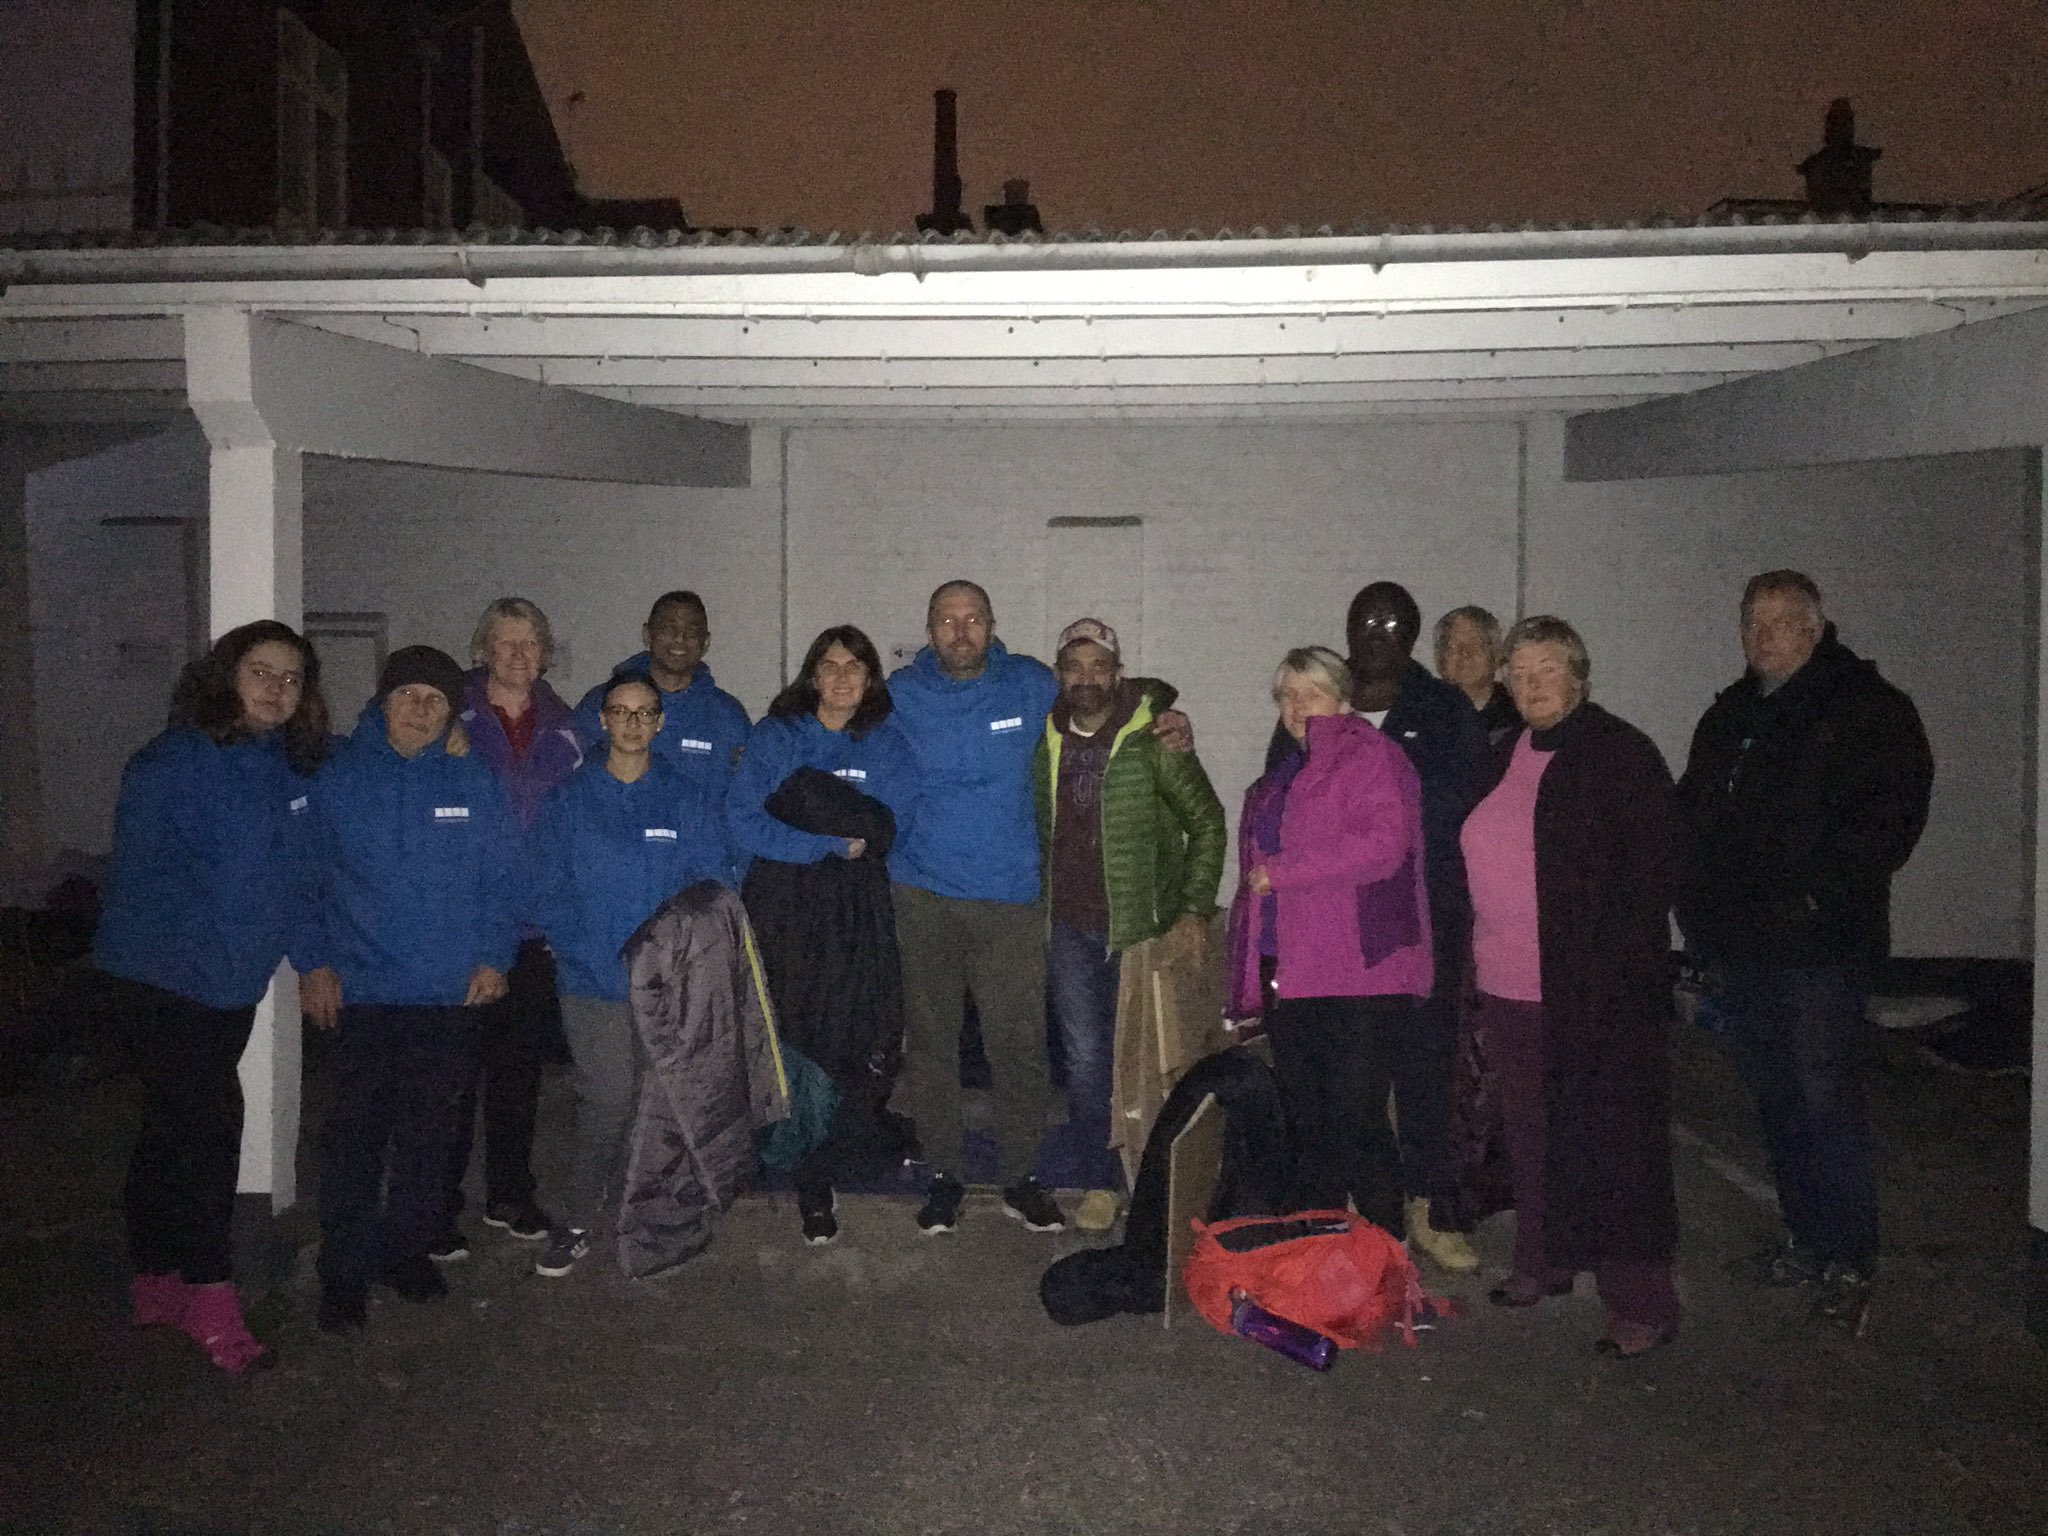 The Great Leicestershire Sleepout